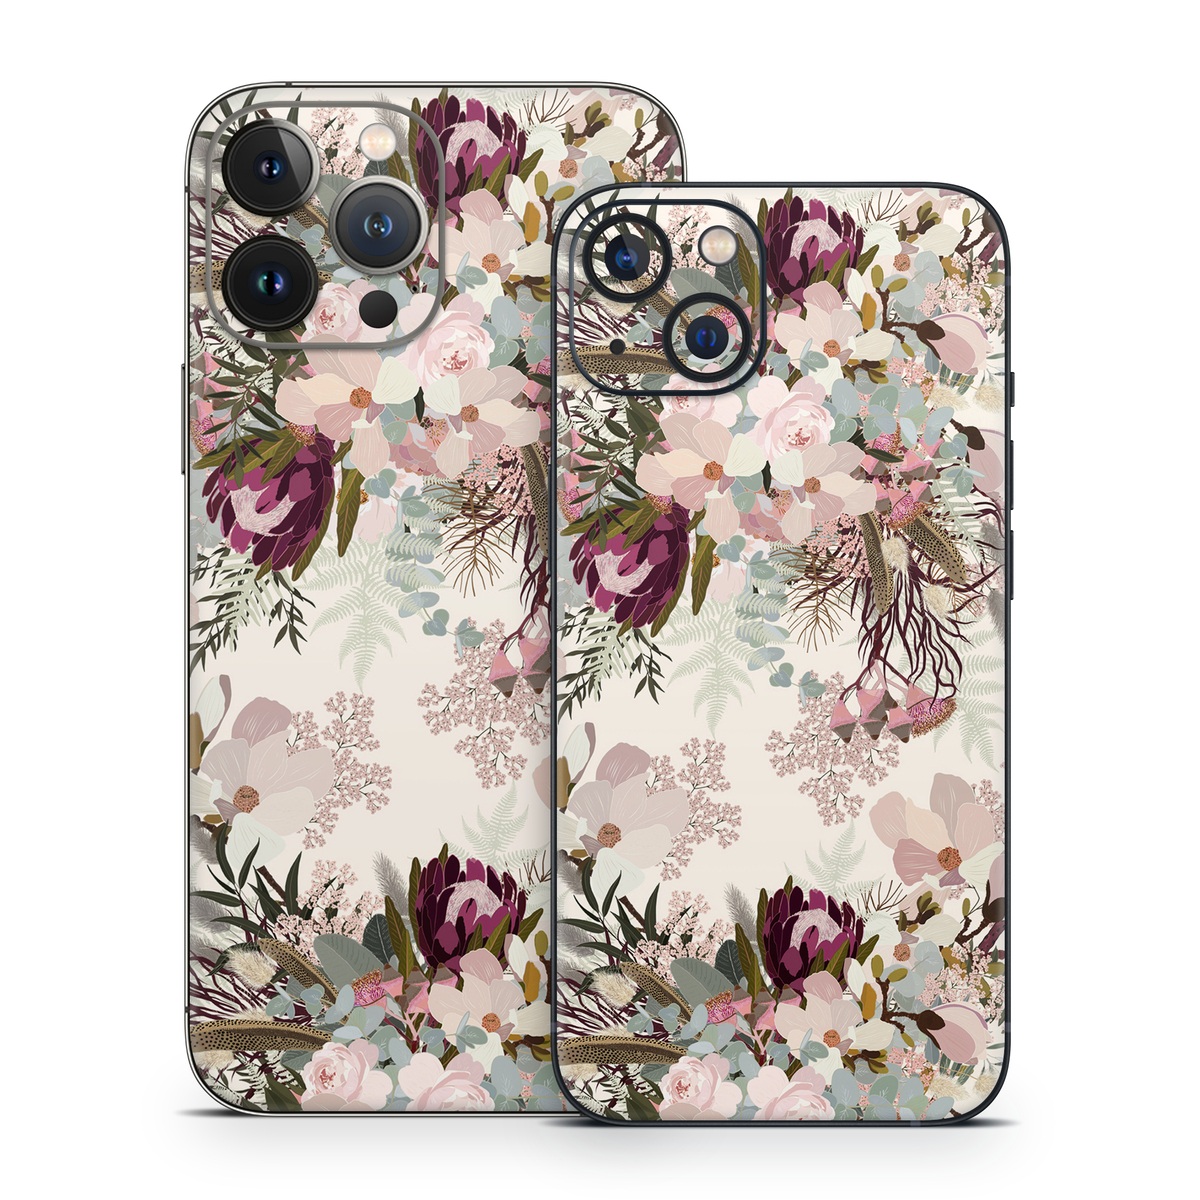 iPhone 13 Series Skin design of Pink, Pattern, Lilac, Flower, Plant, Petal, Floral design, Textile, Design, Blossom, with white, red, pink, blue, brown colors